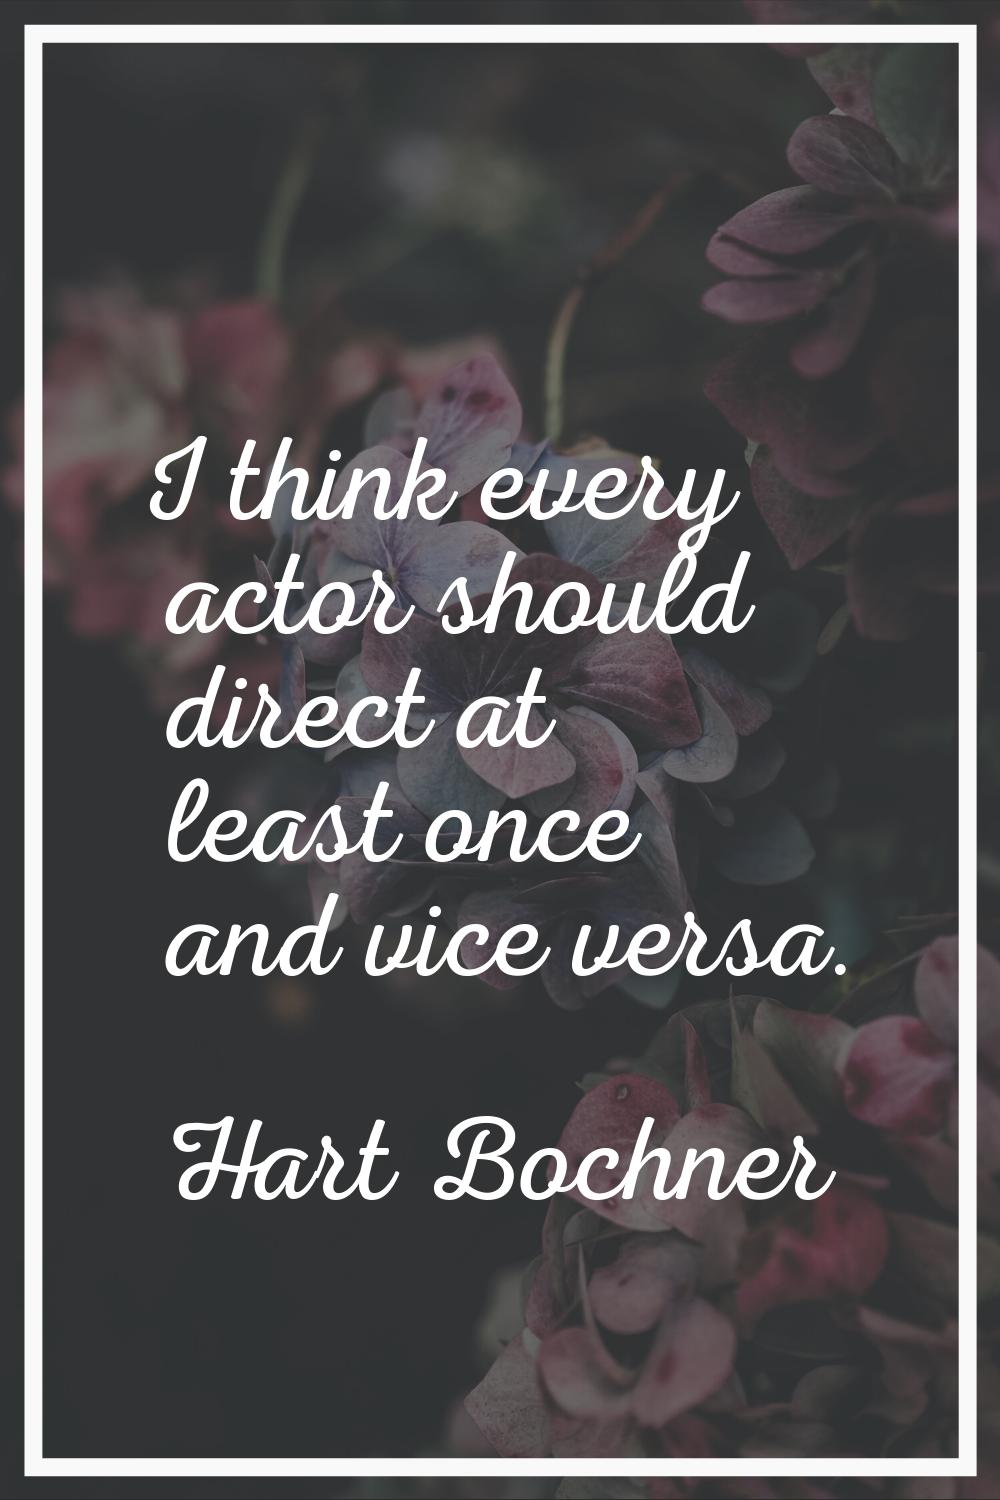 I think every actor should direct at least once and vice versa.